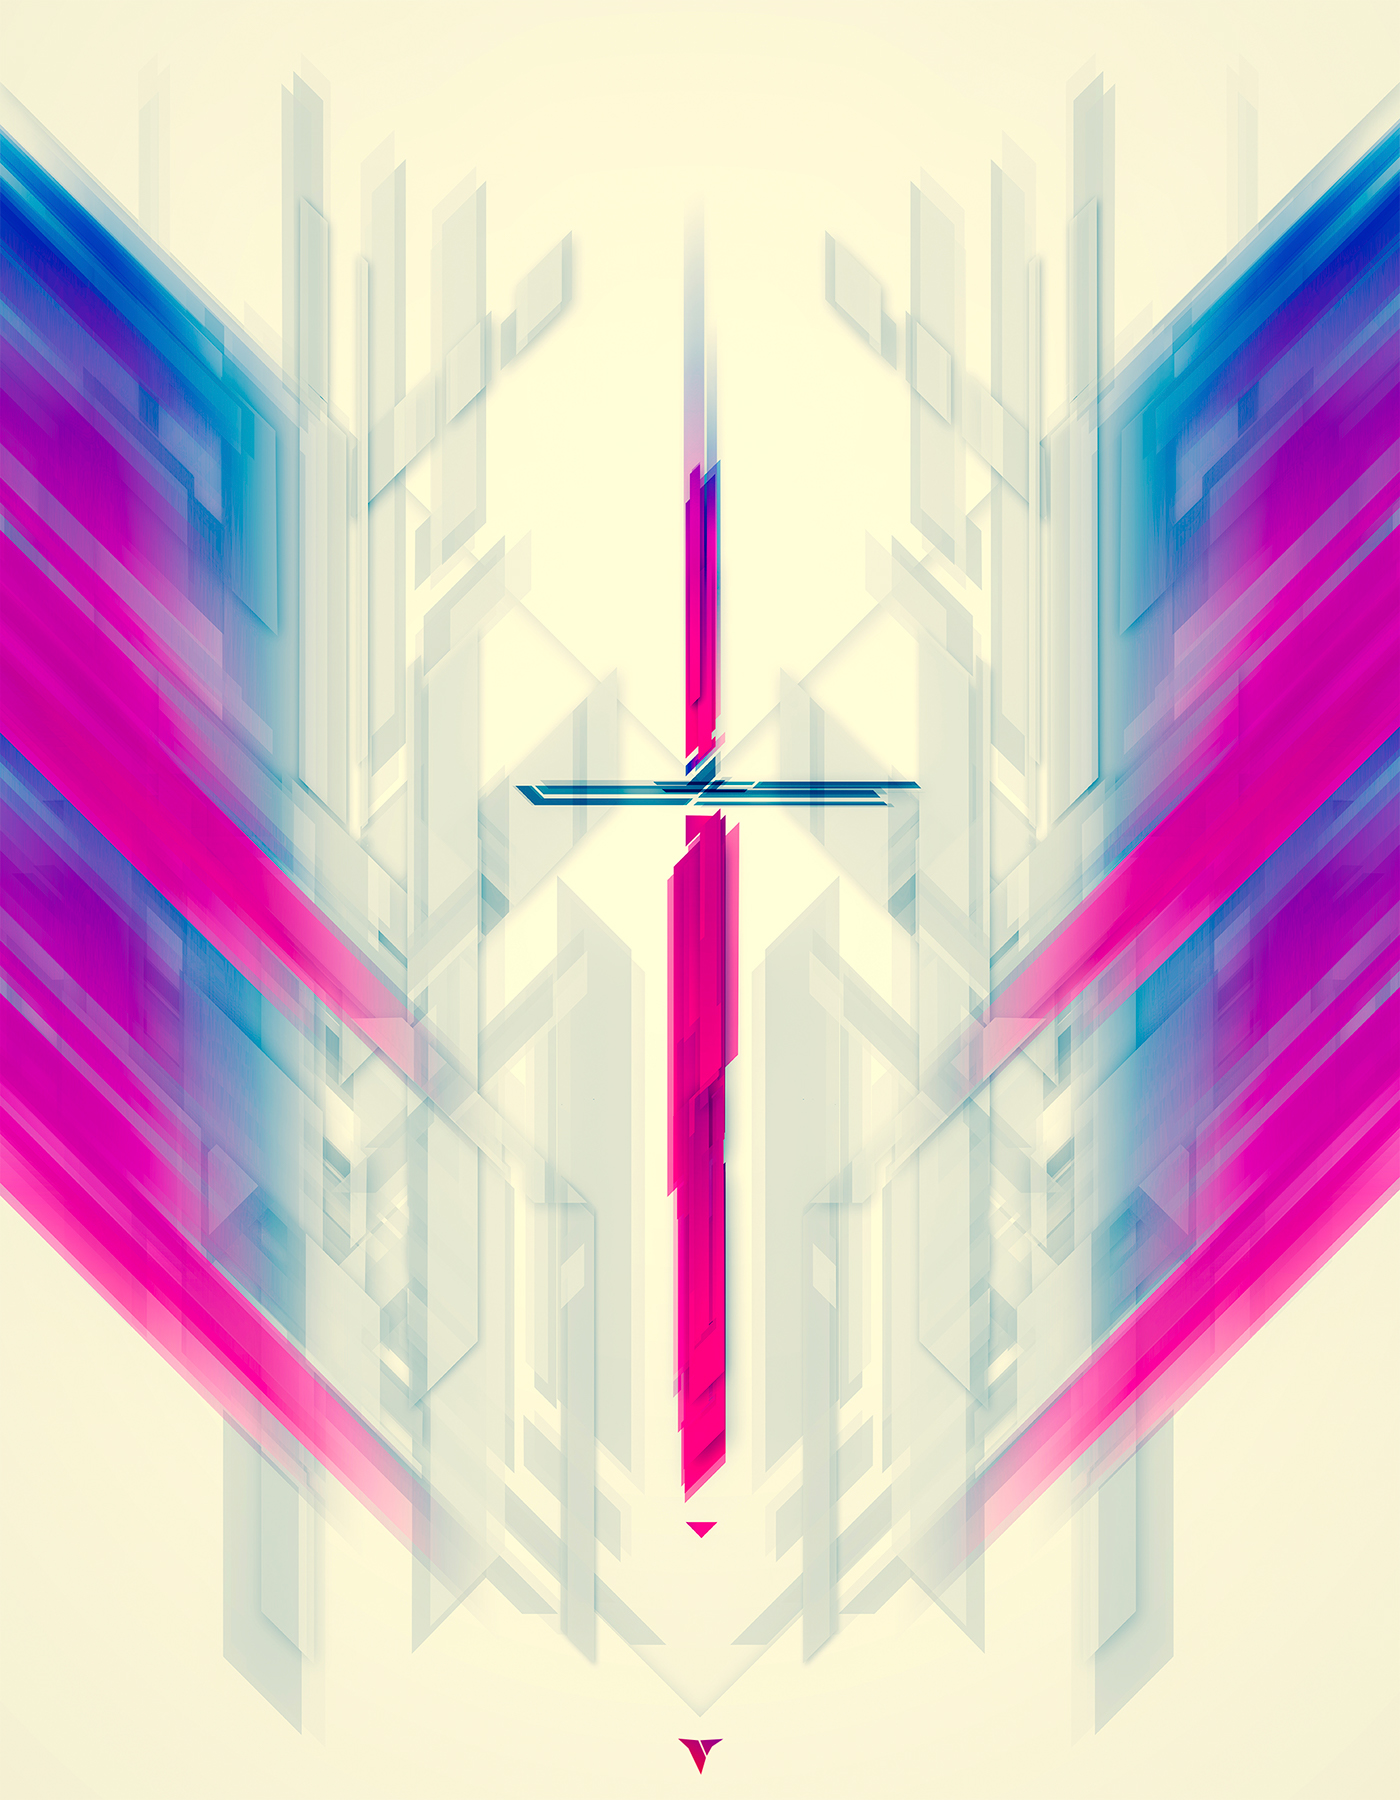 FINEART art abstract Sword blood life red colors Illustrator creative design inspiration dreams univerz human